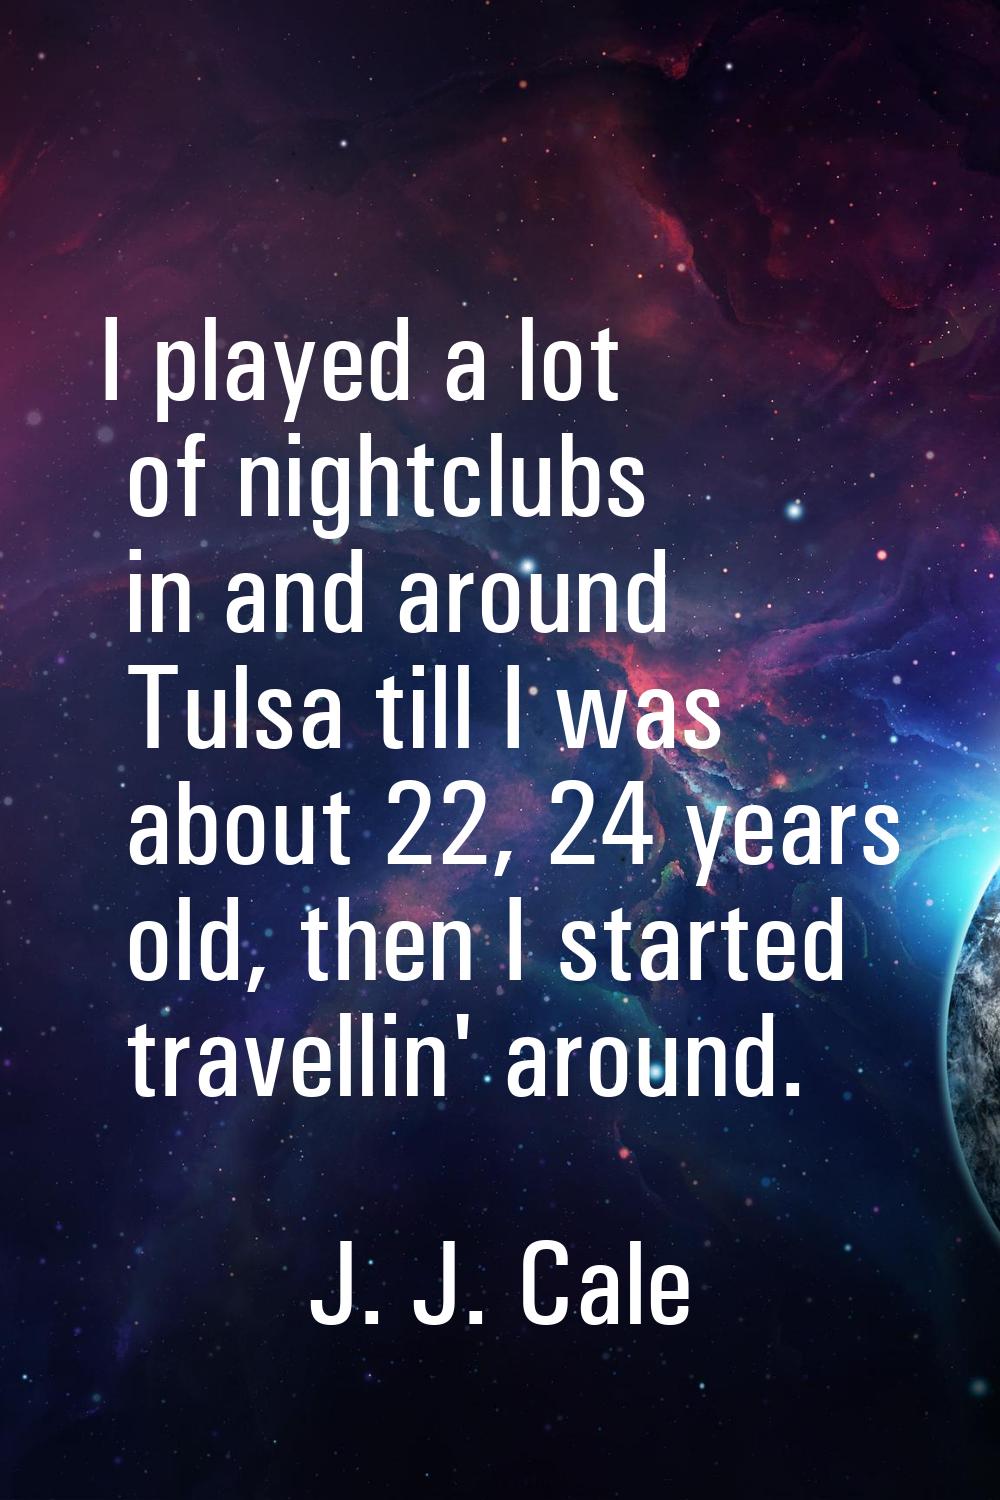 I played a lot of nightclubs in and around Tulsa till I was about 22, 24 years old, then I started 